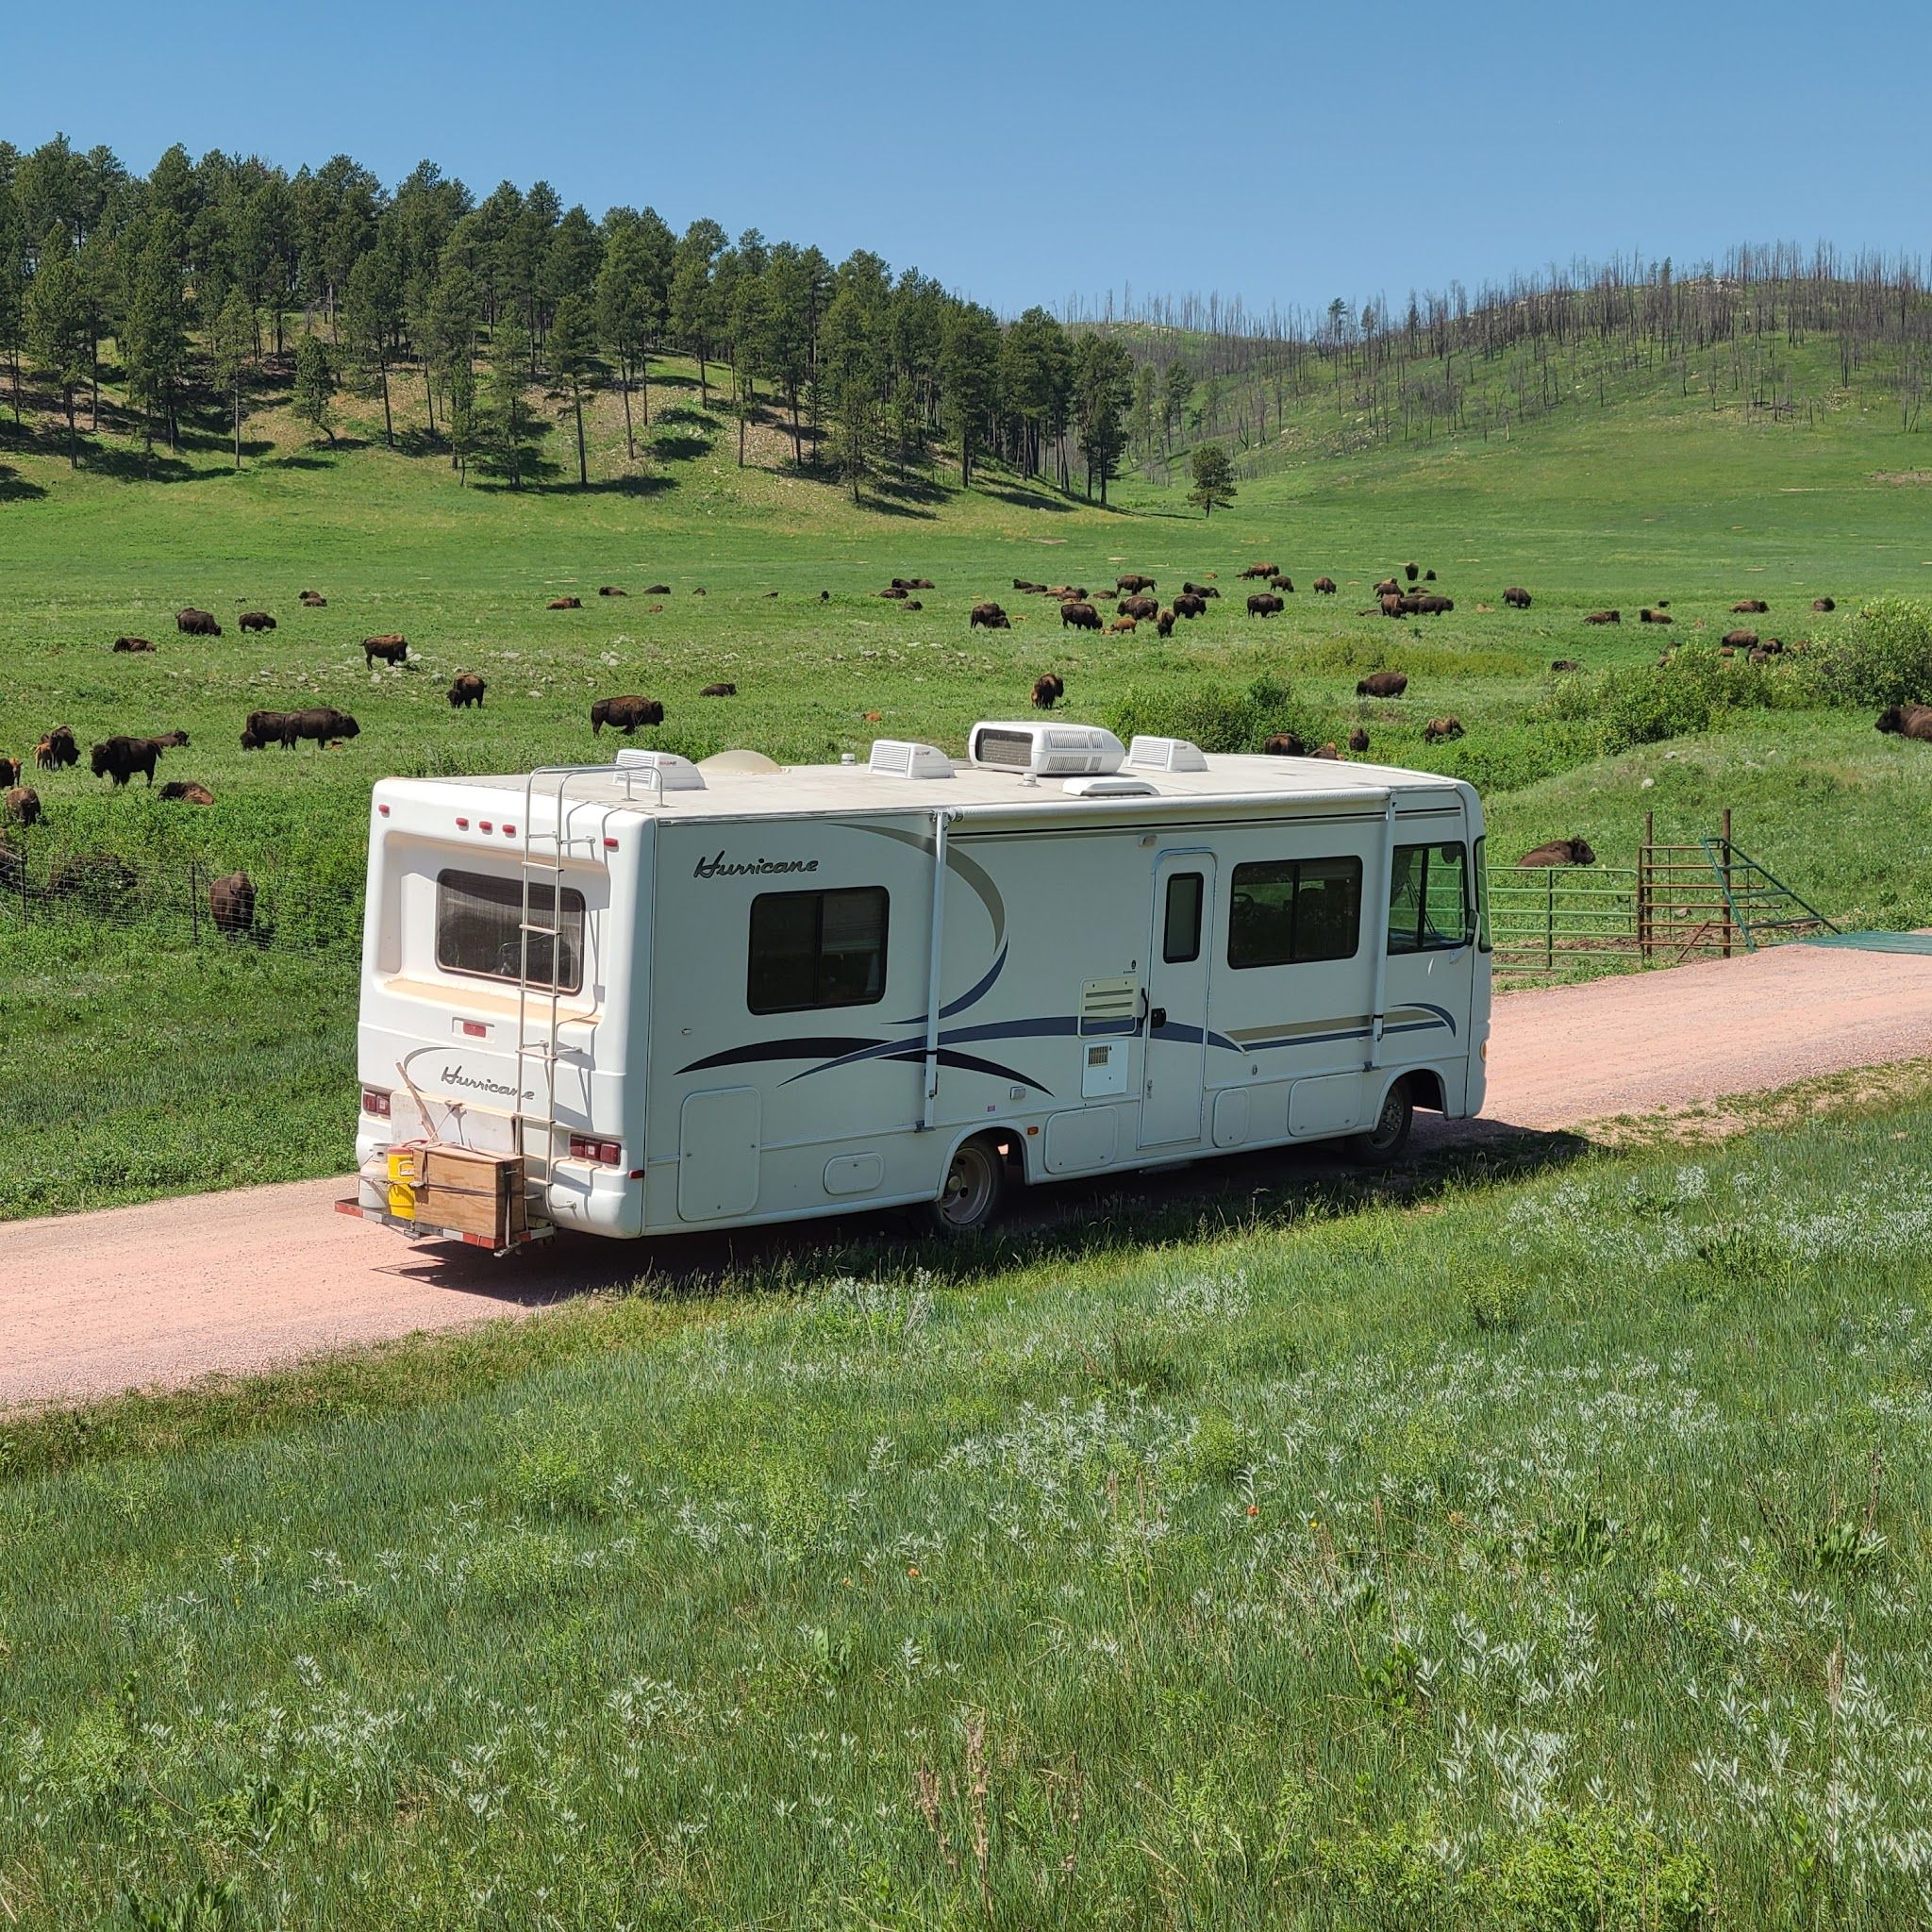 Services & Products Adventure Go RV in Glenwood IA